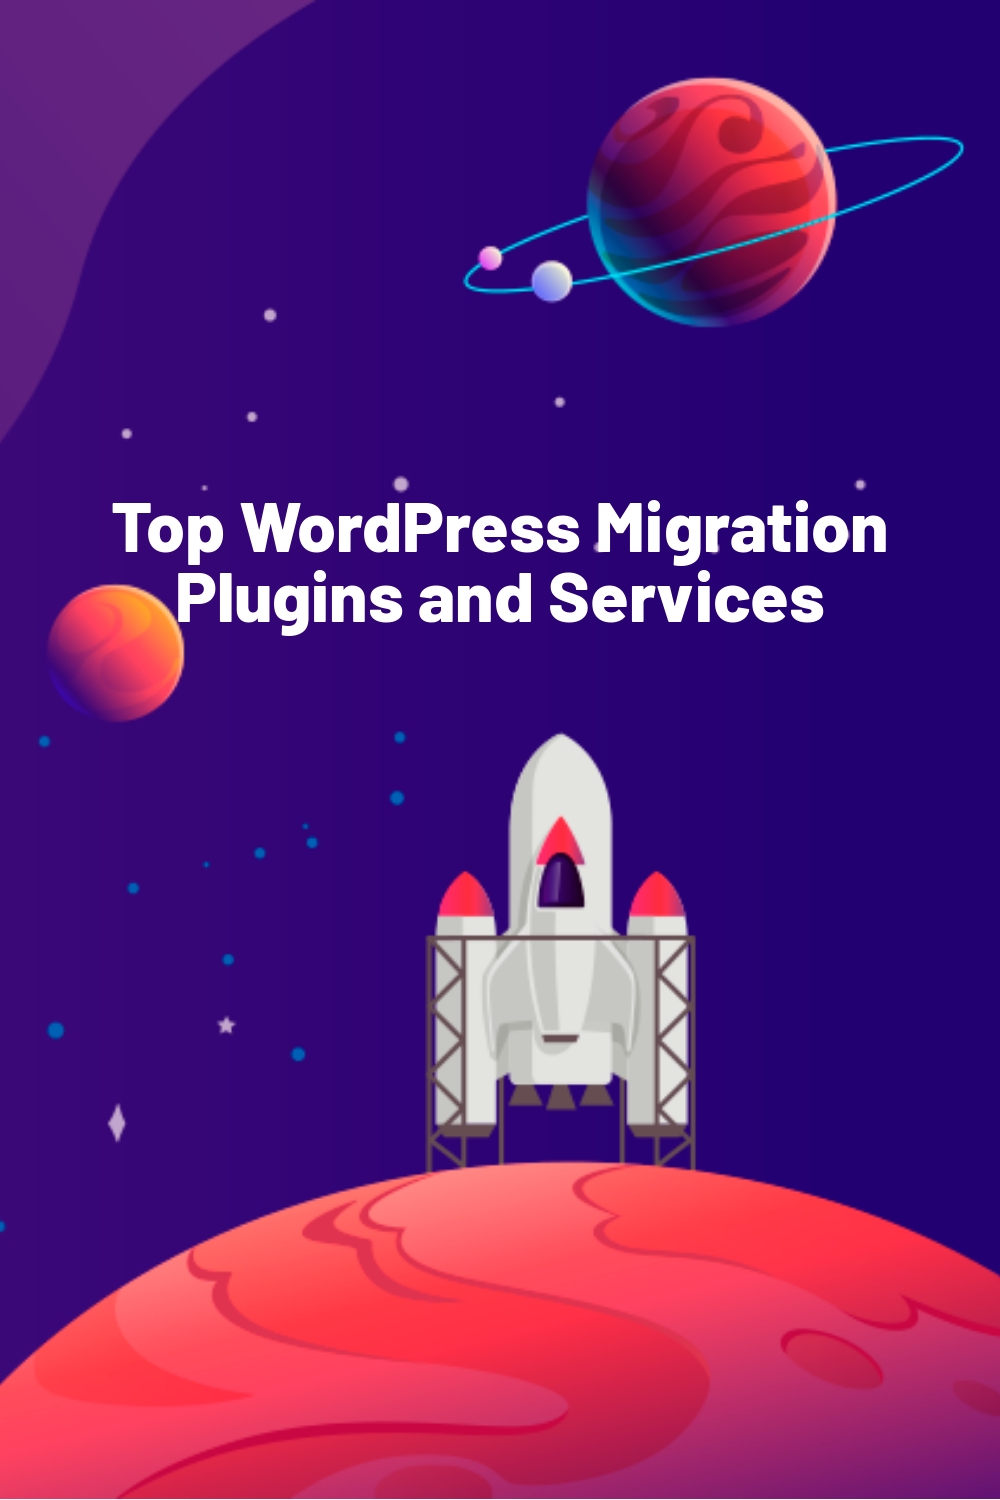 Top WordPress Migration Plugins and Services